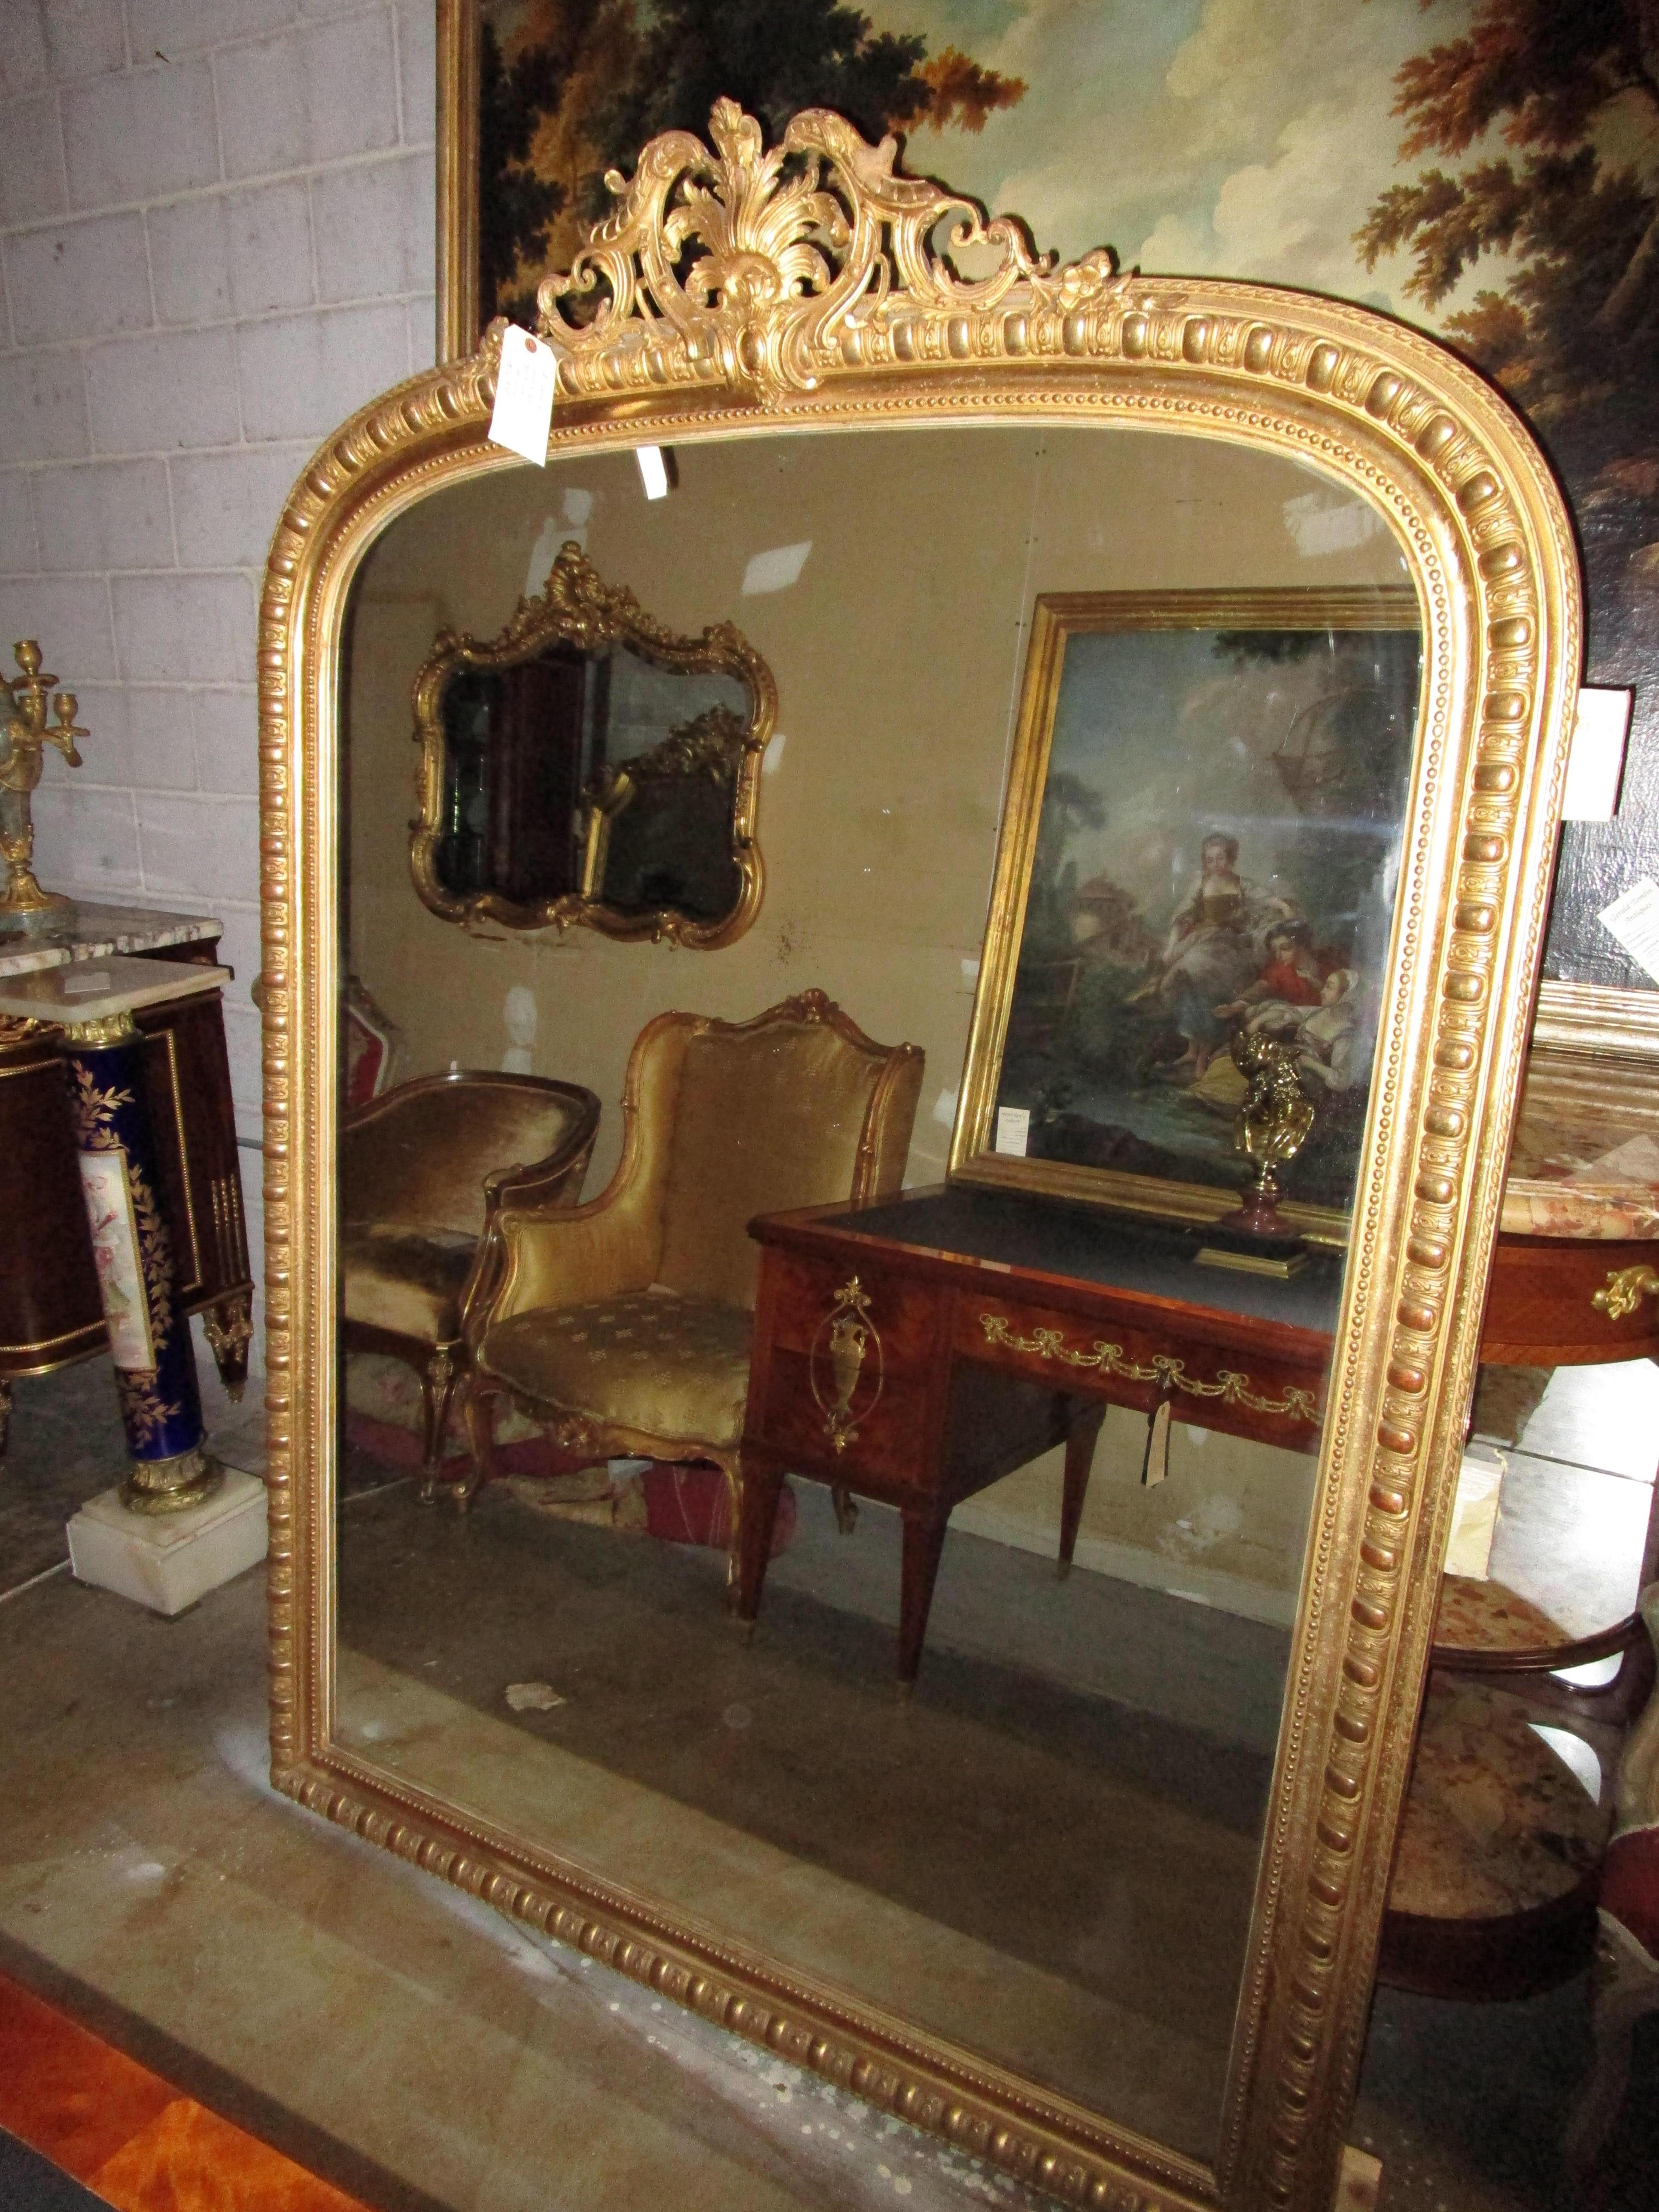 A very fine 19th century French Louis XVI gilt carved large mirror.